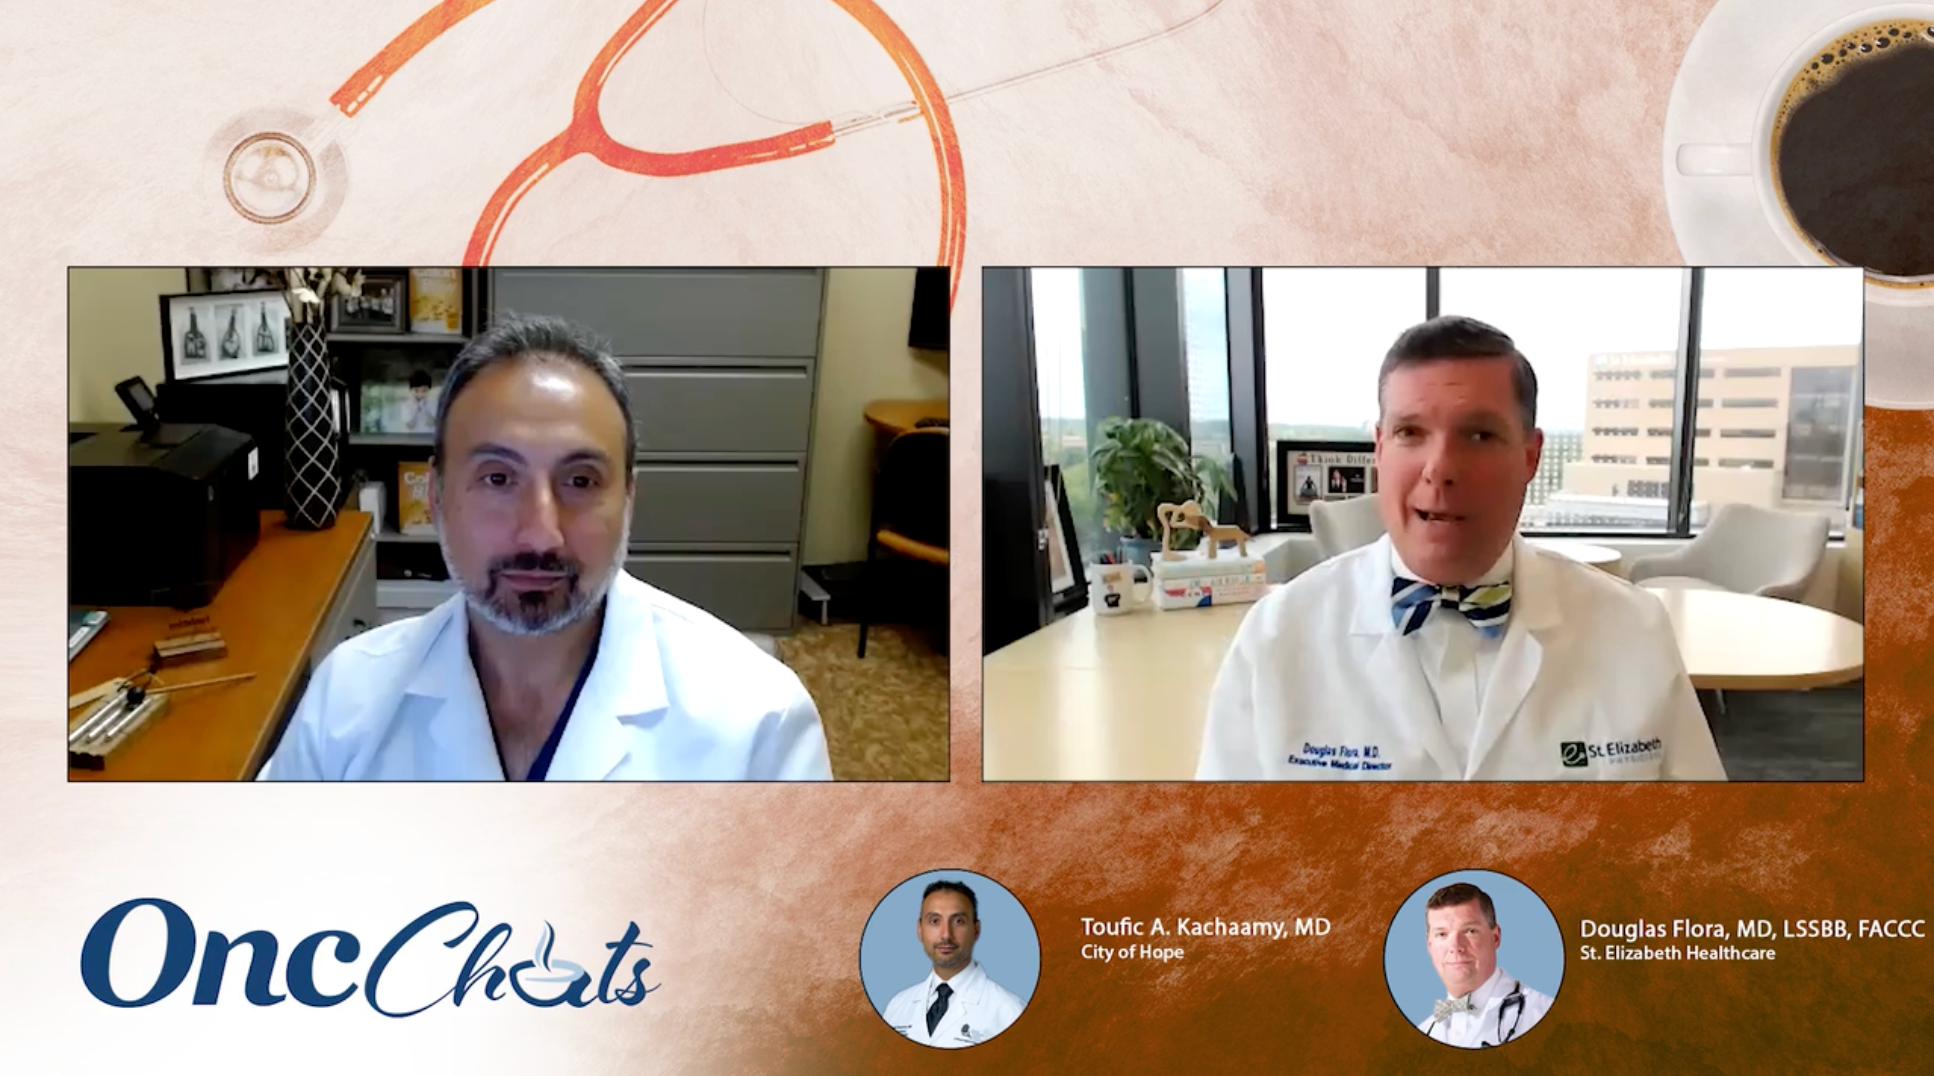 In this final episode of OncChats: Assessing the Promise of AI in Oncology, Toufic A. Kachaamy, MD, and Douglas Flora, MD, LSSBB, FACCC, discuss a roadmap of artificial intelligence (AI) advances in the next 5 to 10 years.